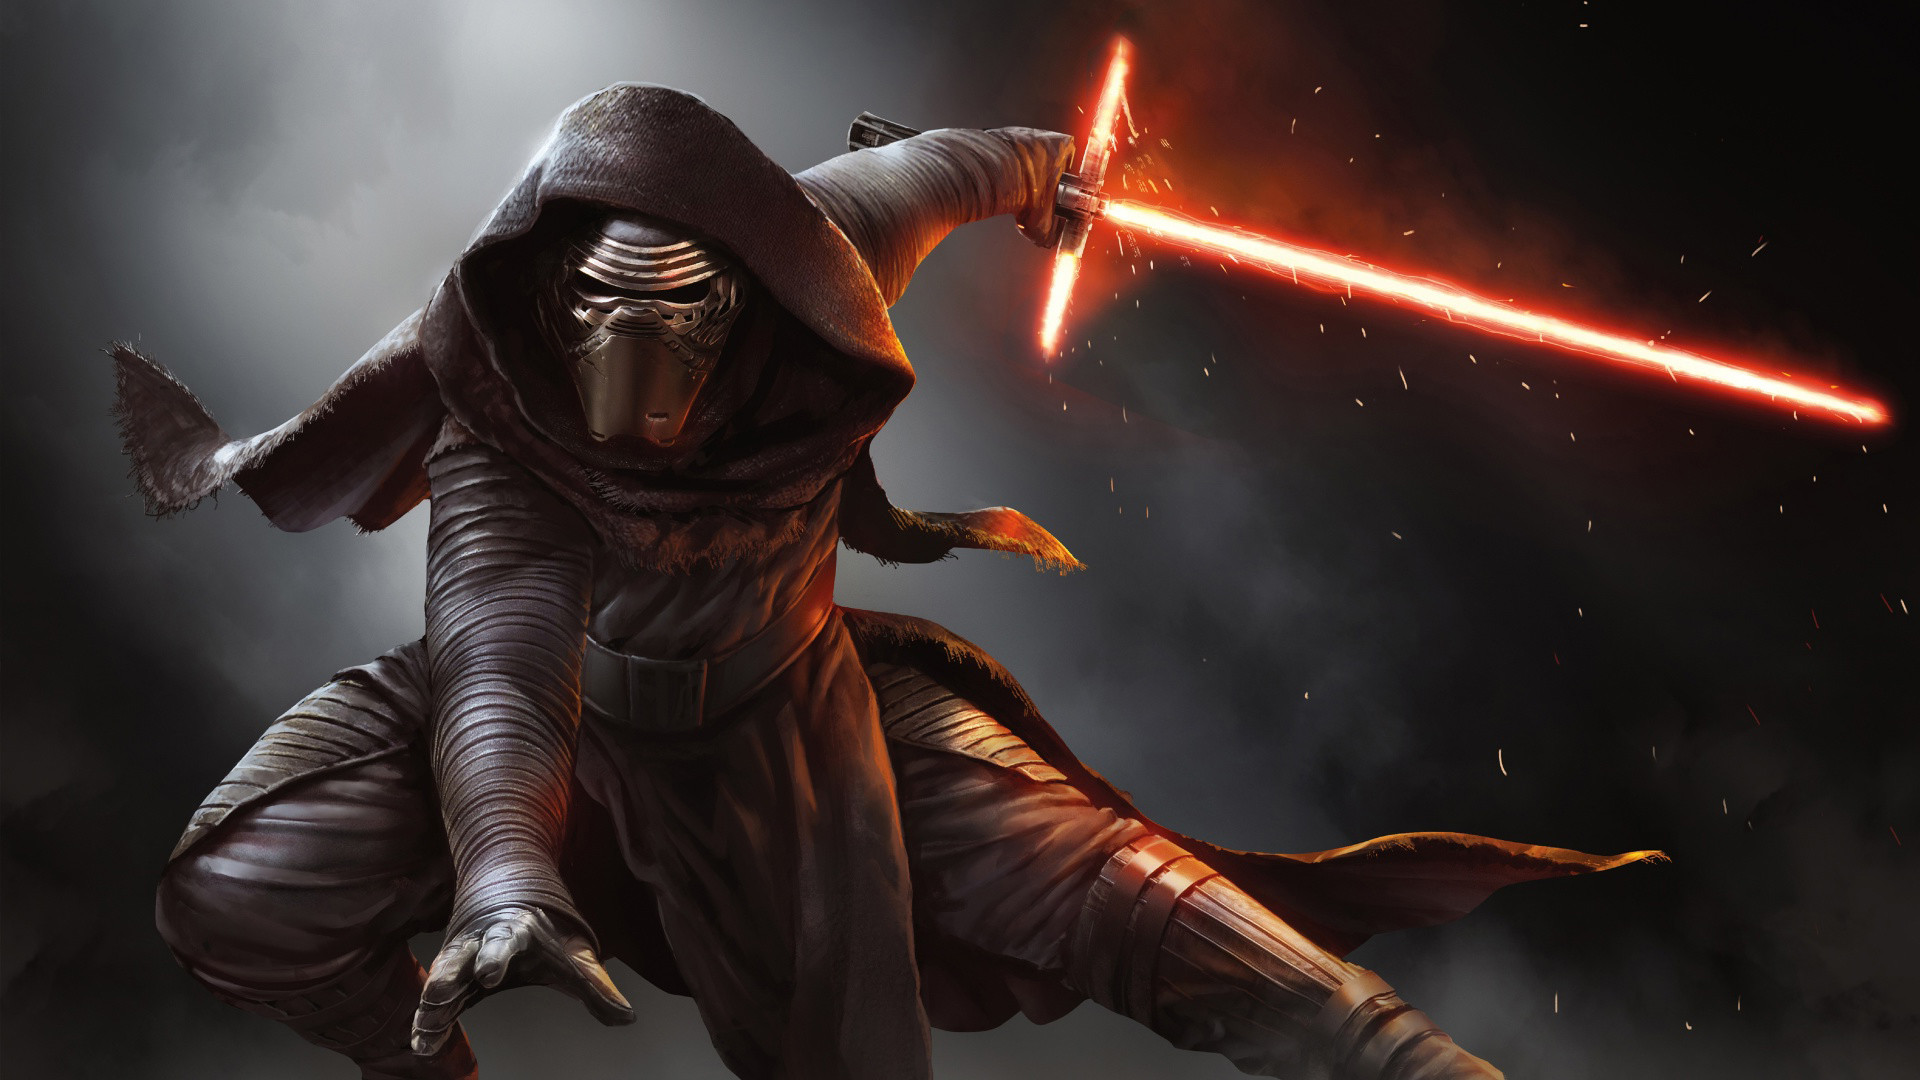 1920x1080 KYLO REN WALLPAPERS FREE Wallpapers & Background images .